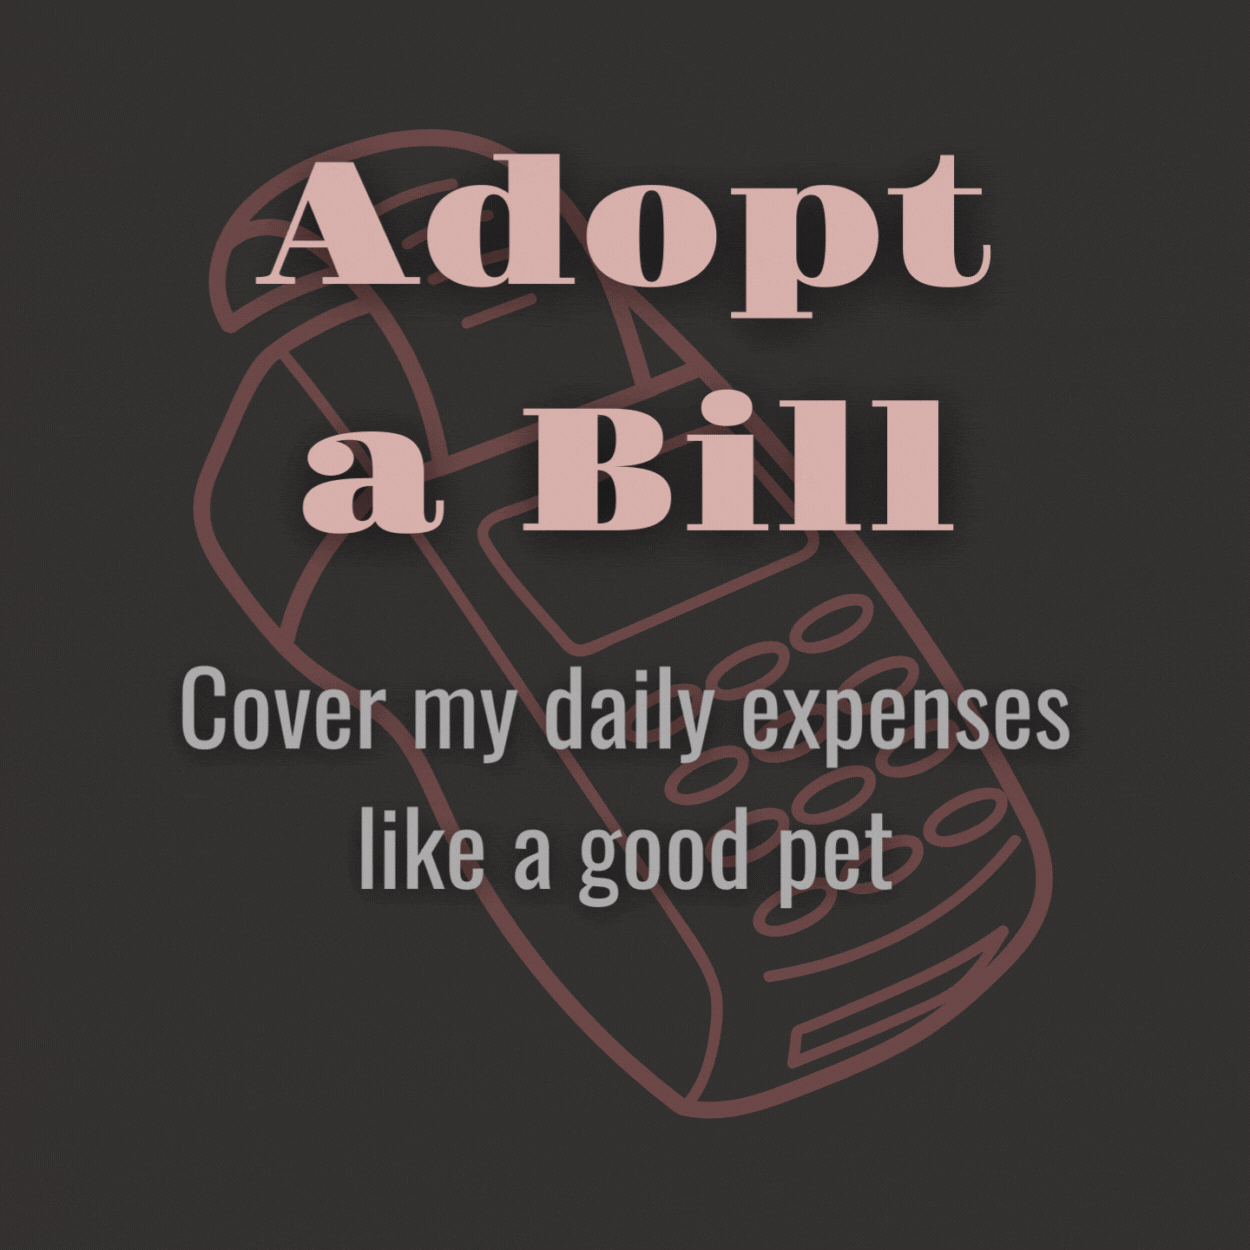 Adopt a bill for me